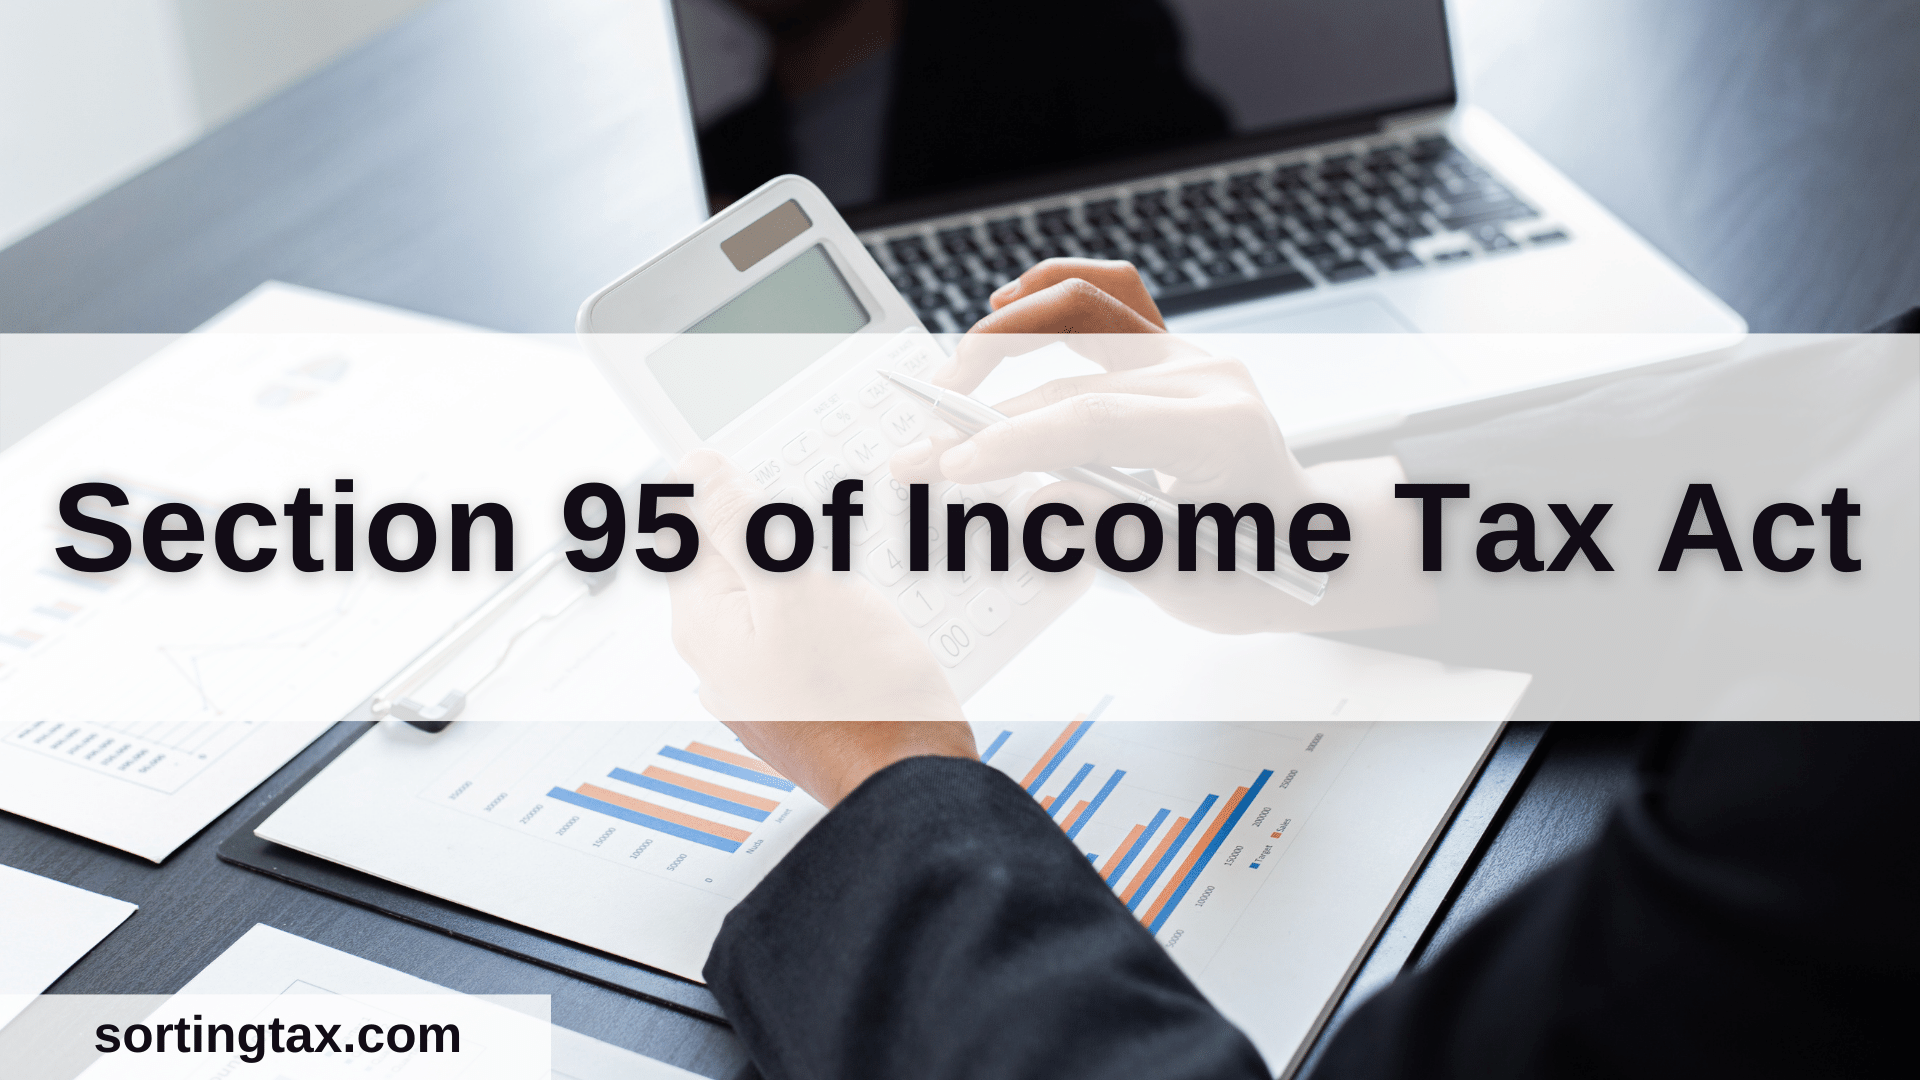 Section 95 of Income Tax Act